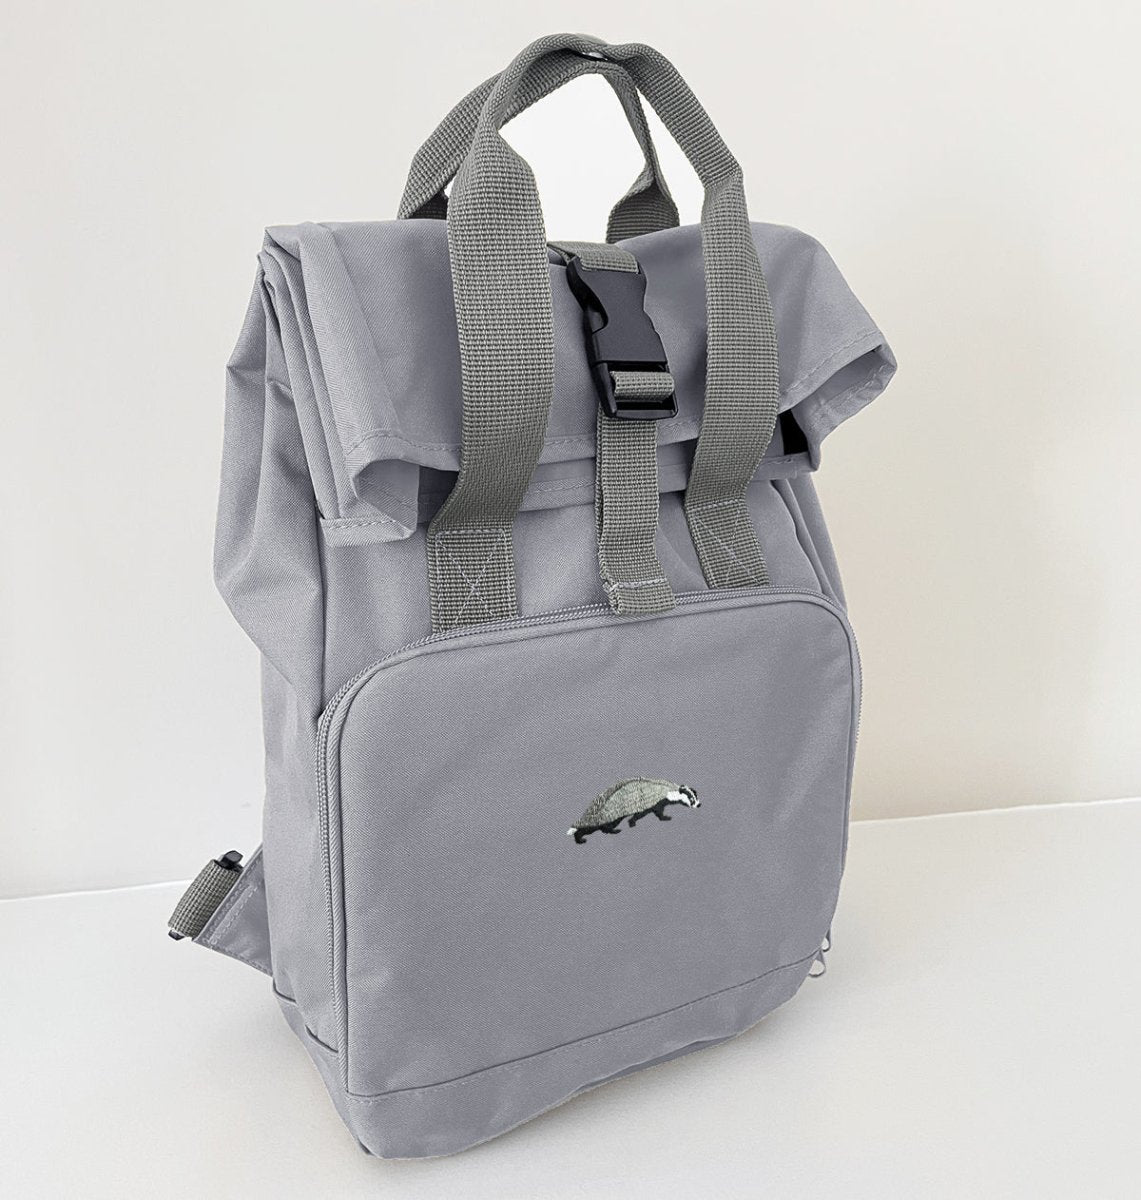 Badger Mini Roll-top Recycled Backpack - Blue Panda